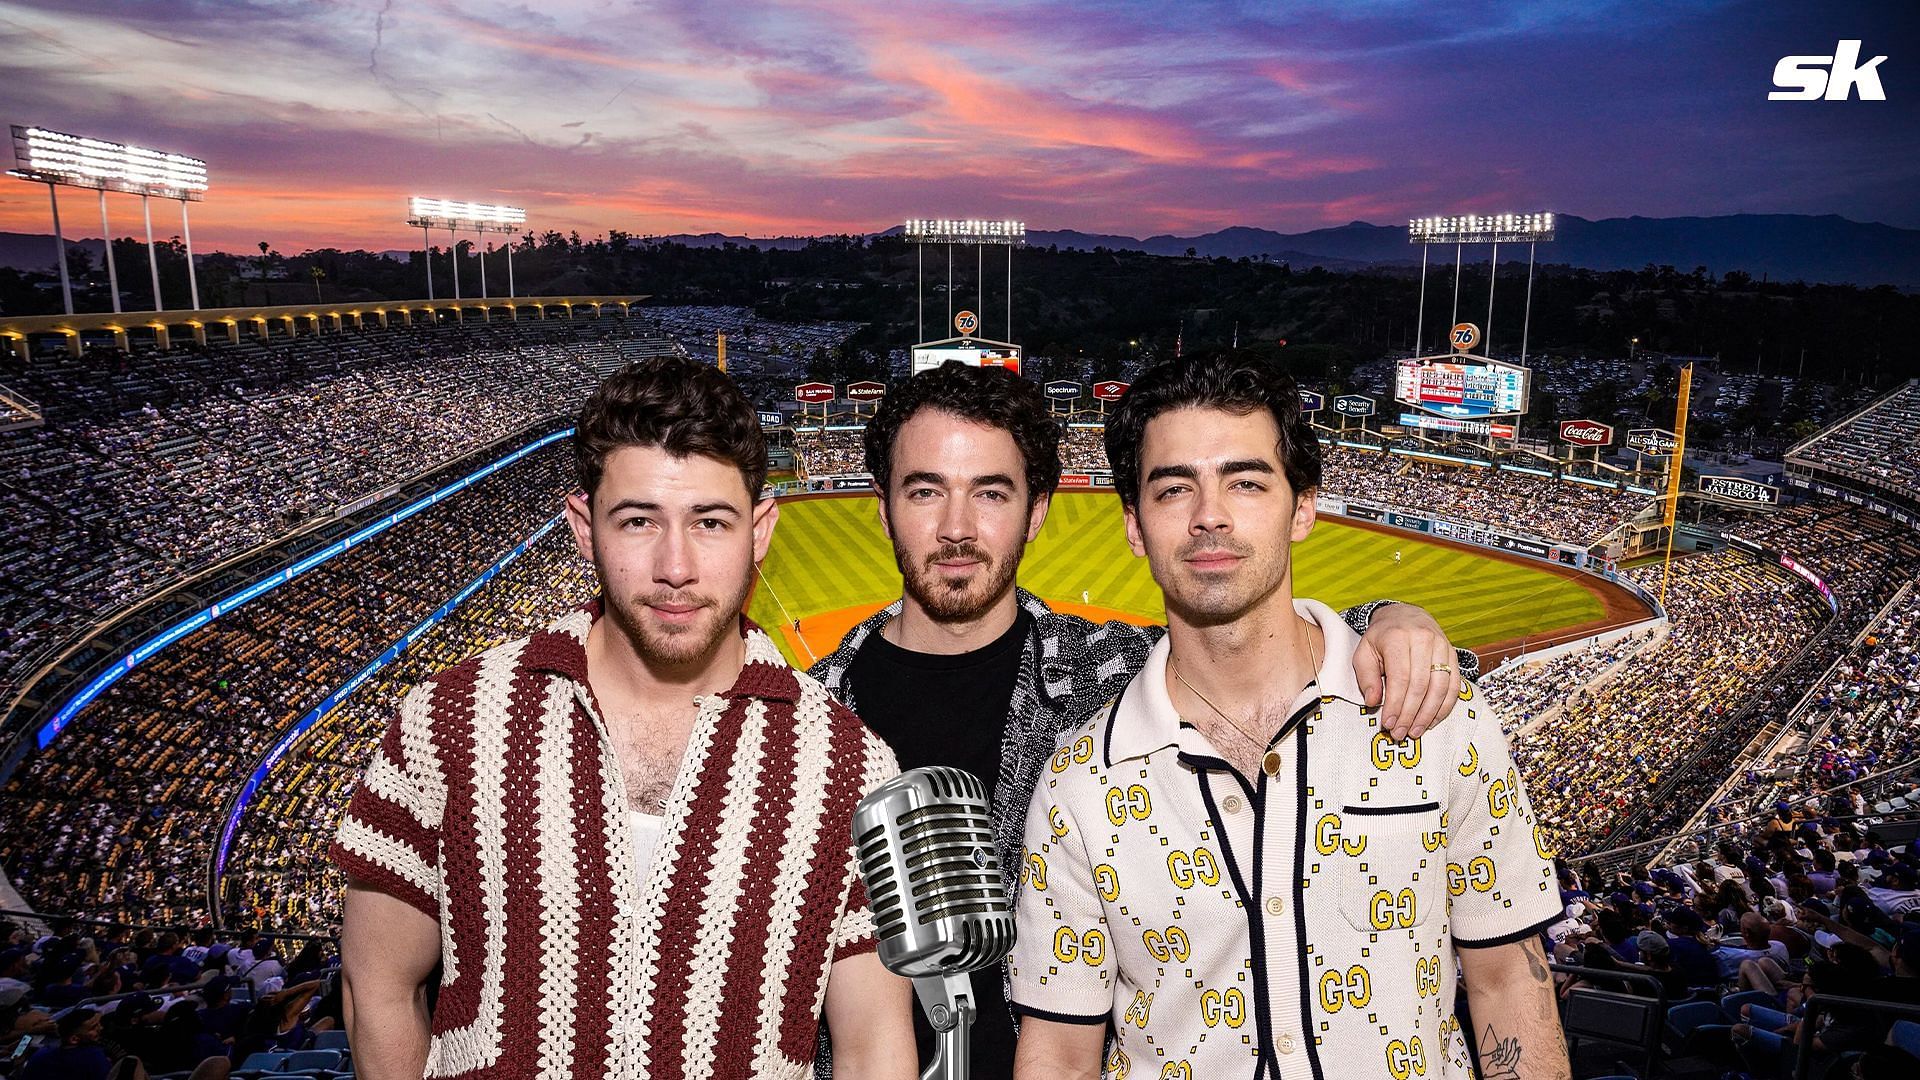 Fans ripped into the Jonas Brothers for their show at Dodger Stadium